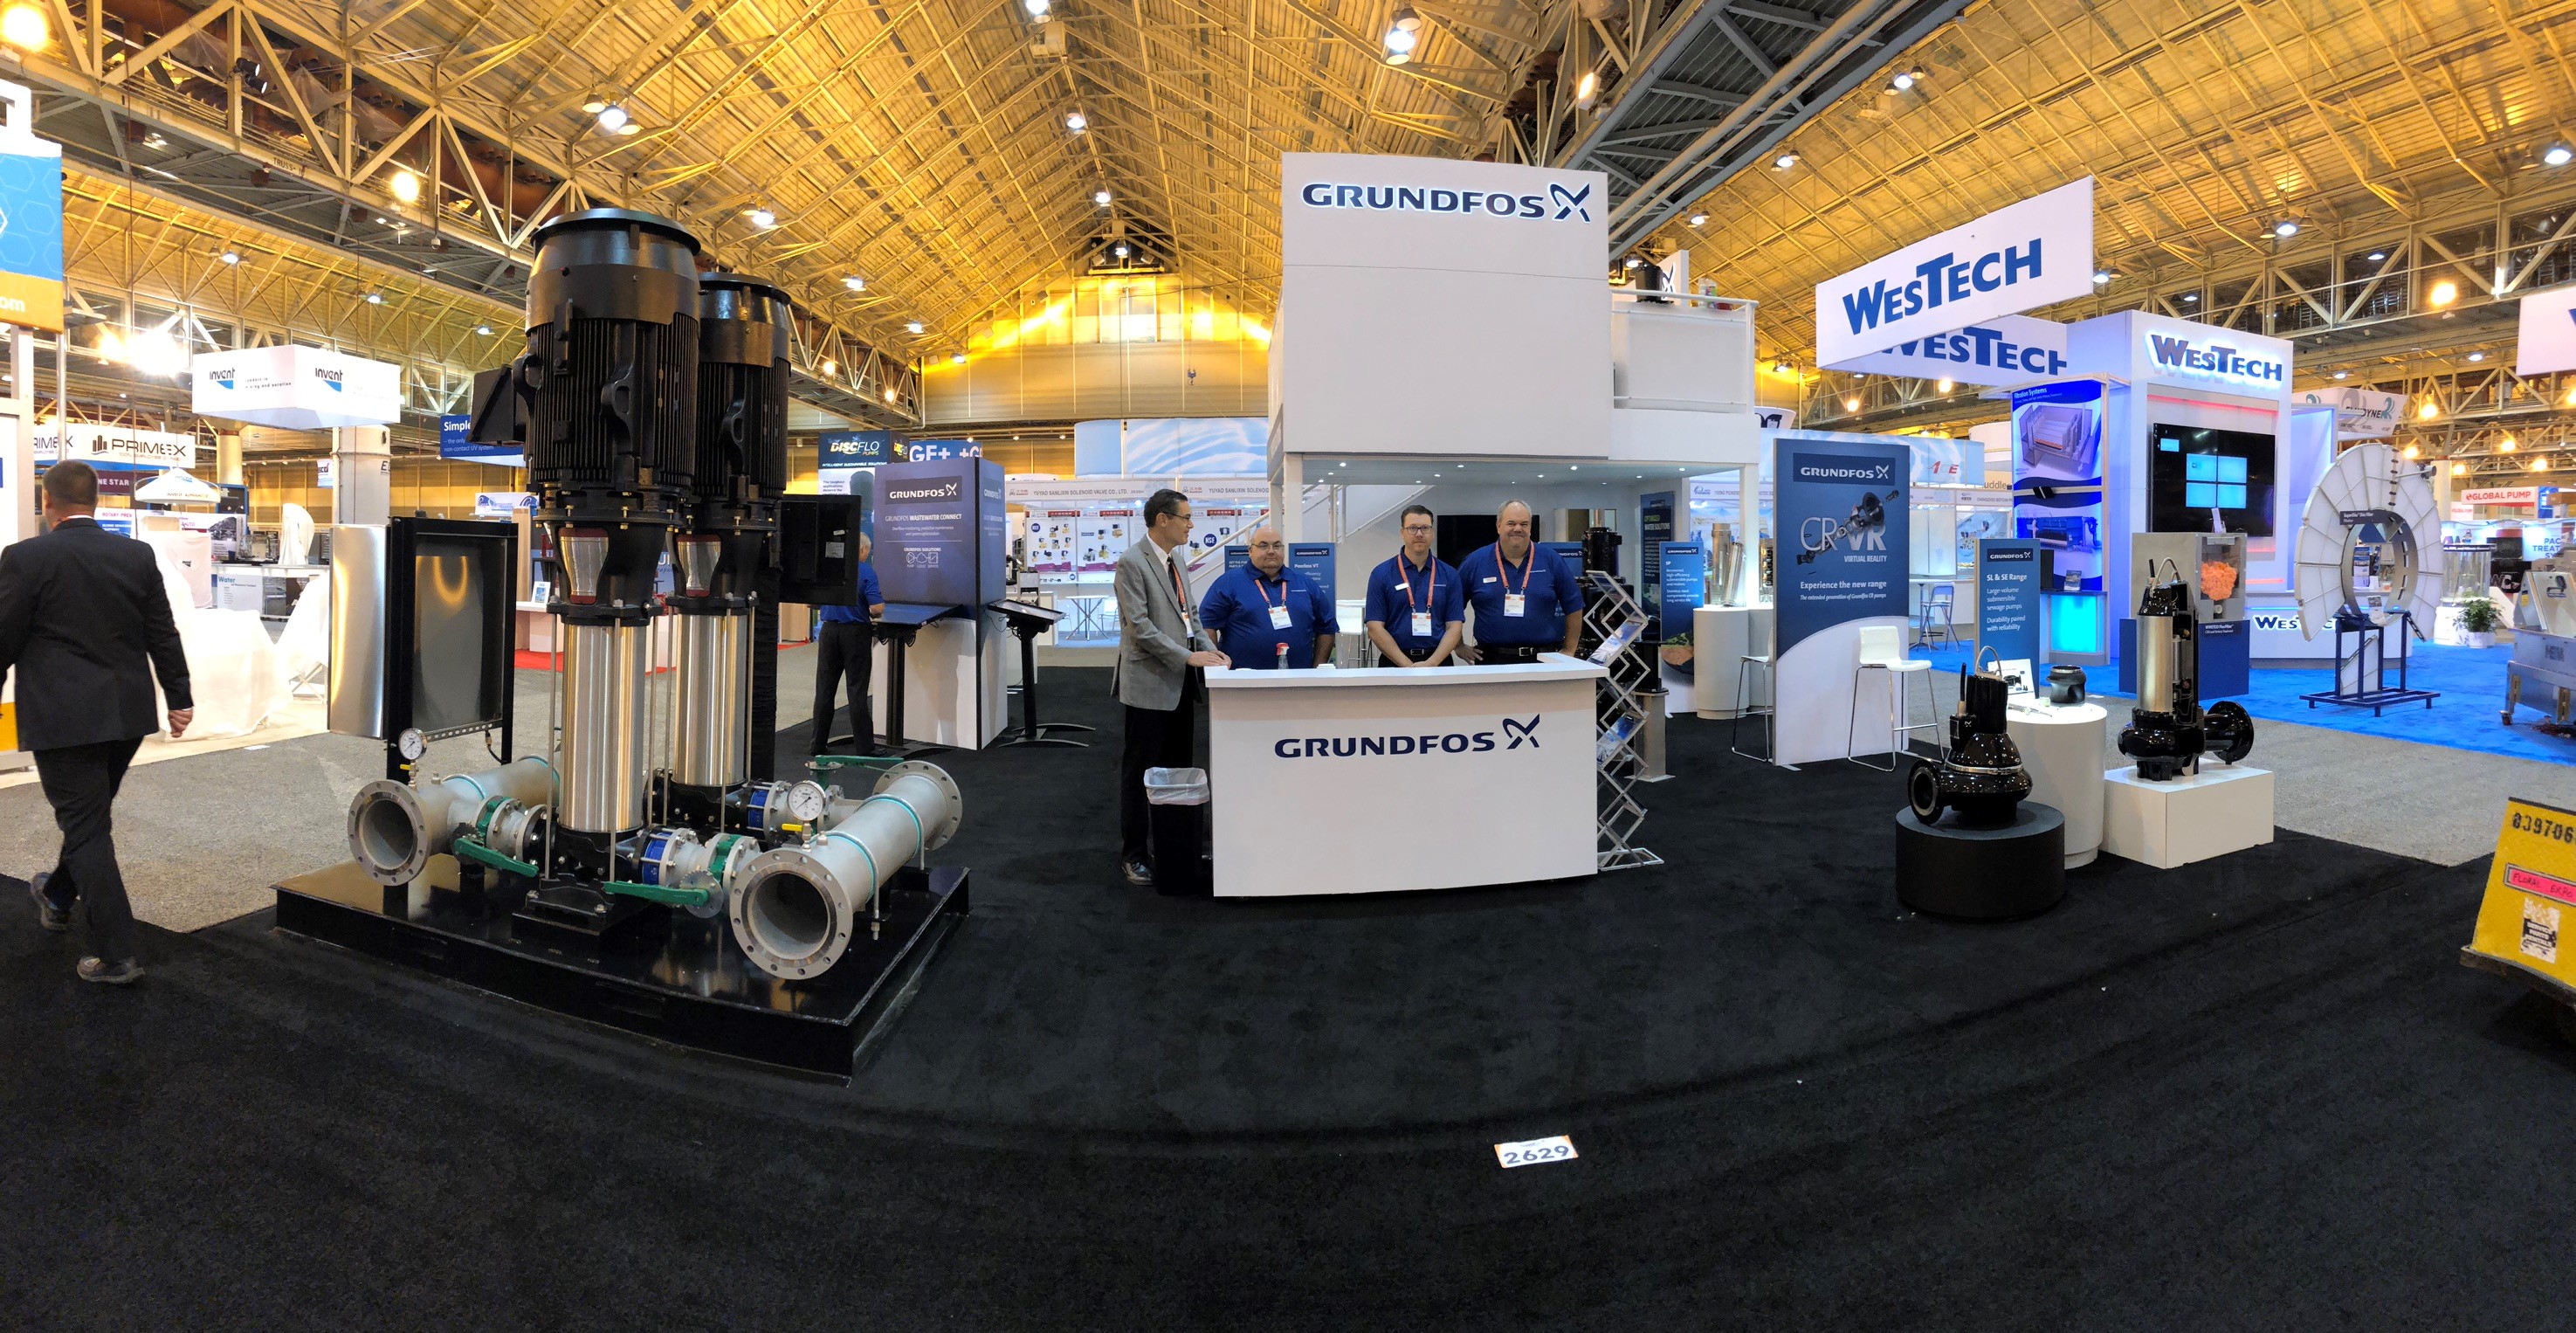 The Grundfos booth at WEFTEC.